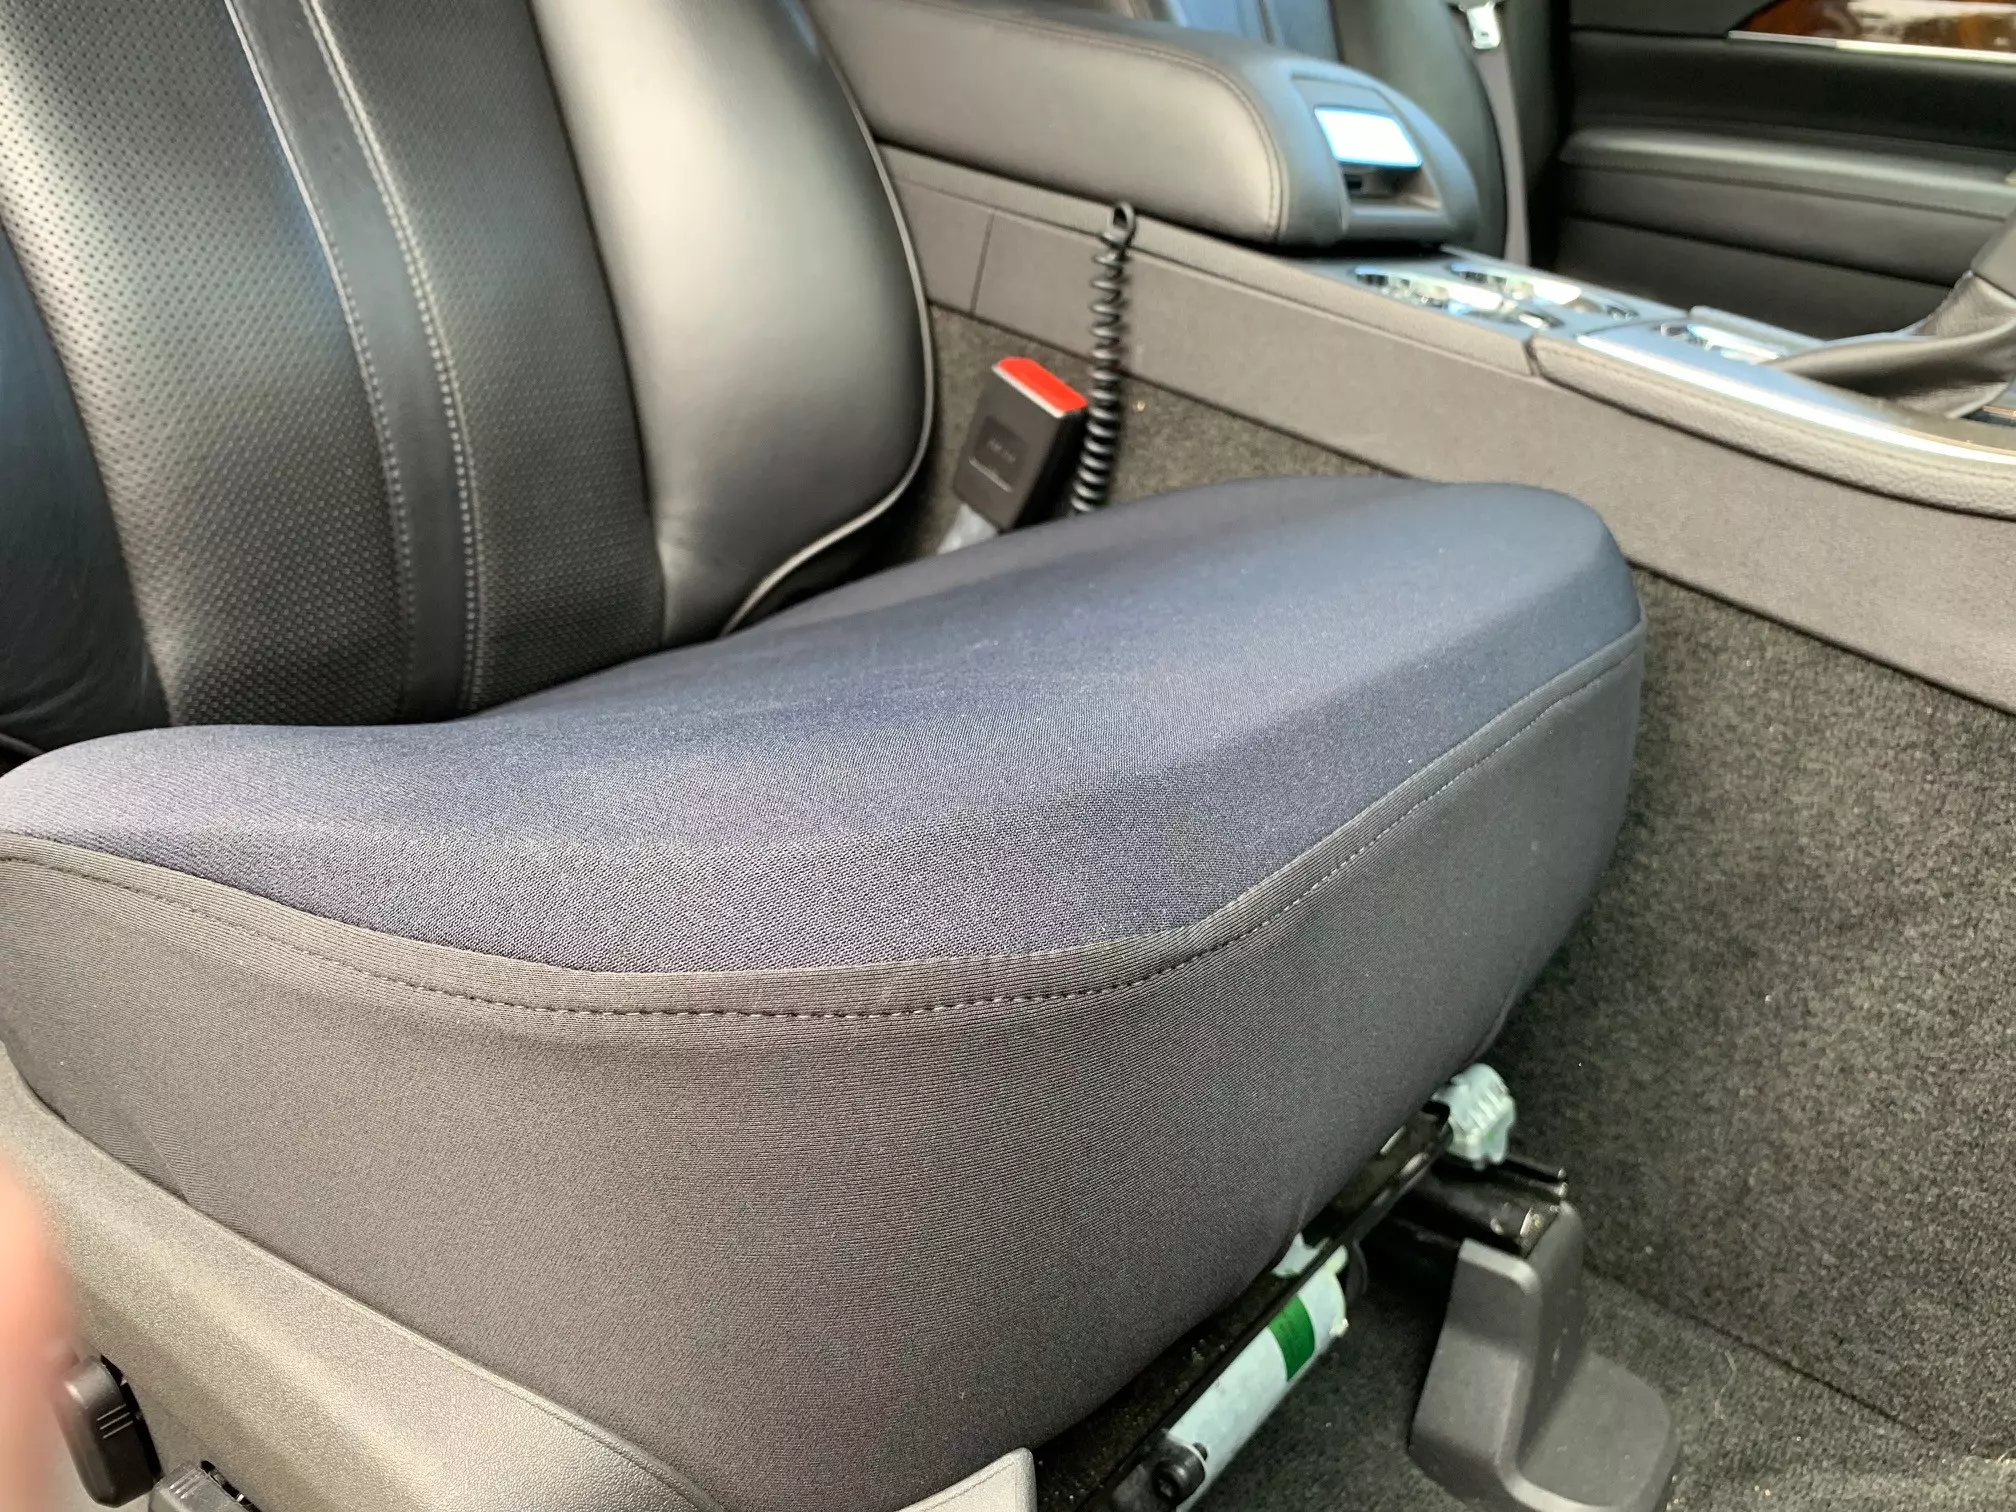 Bottom Only Seat Cover for Ford Escape 2017-19-(SINGLE) Neoprene Material